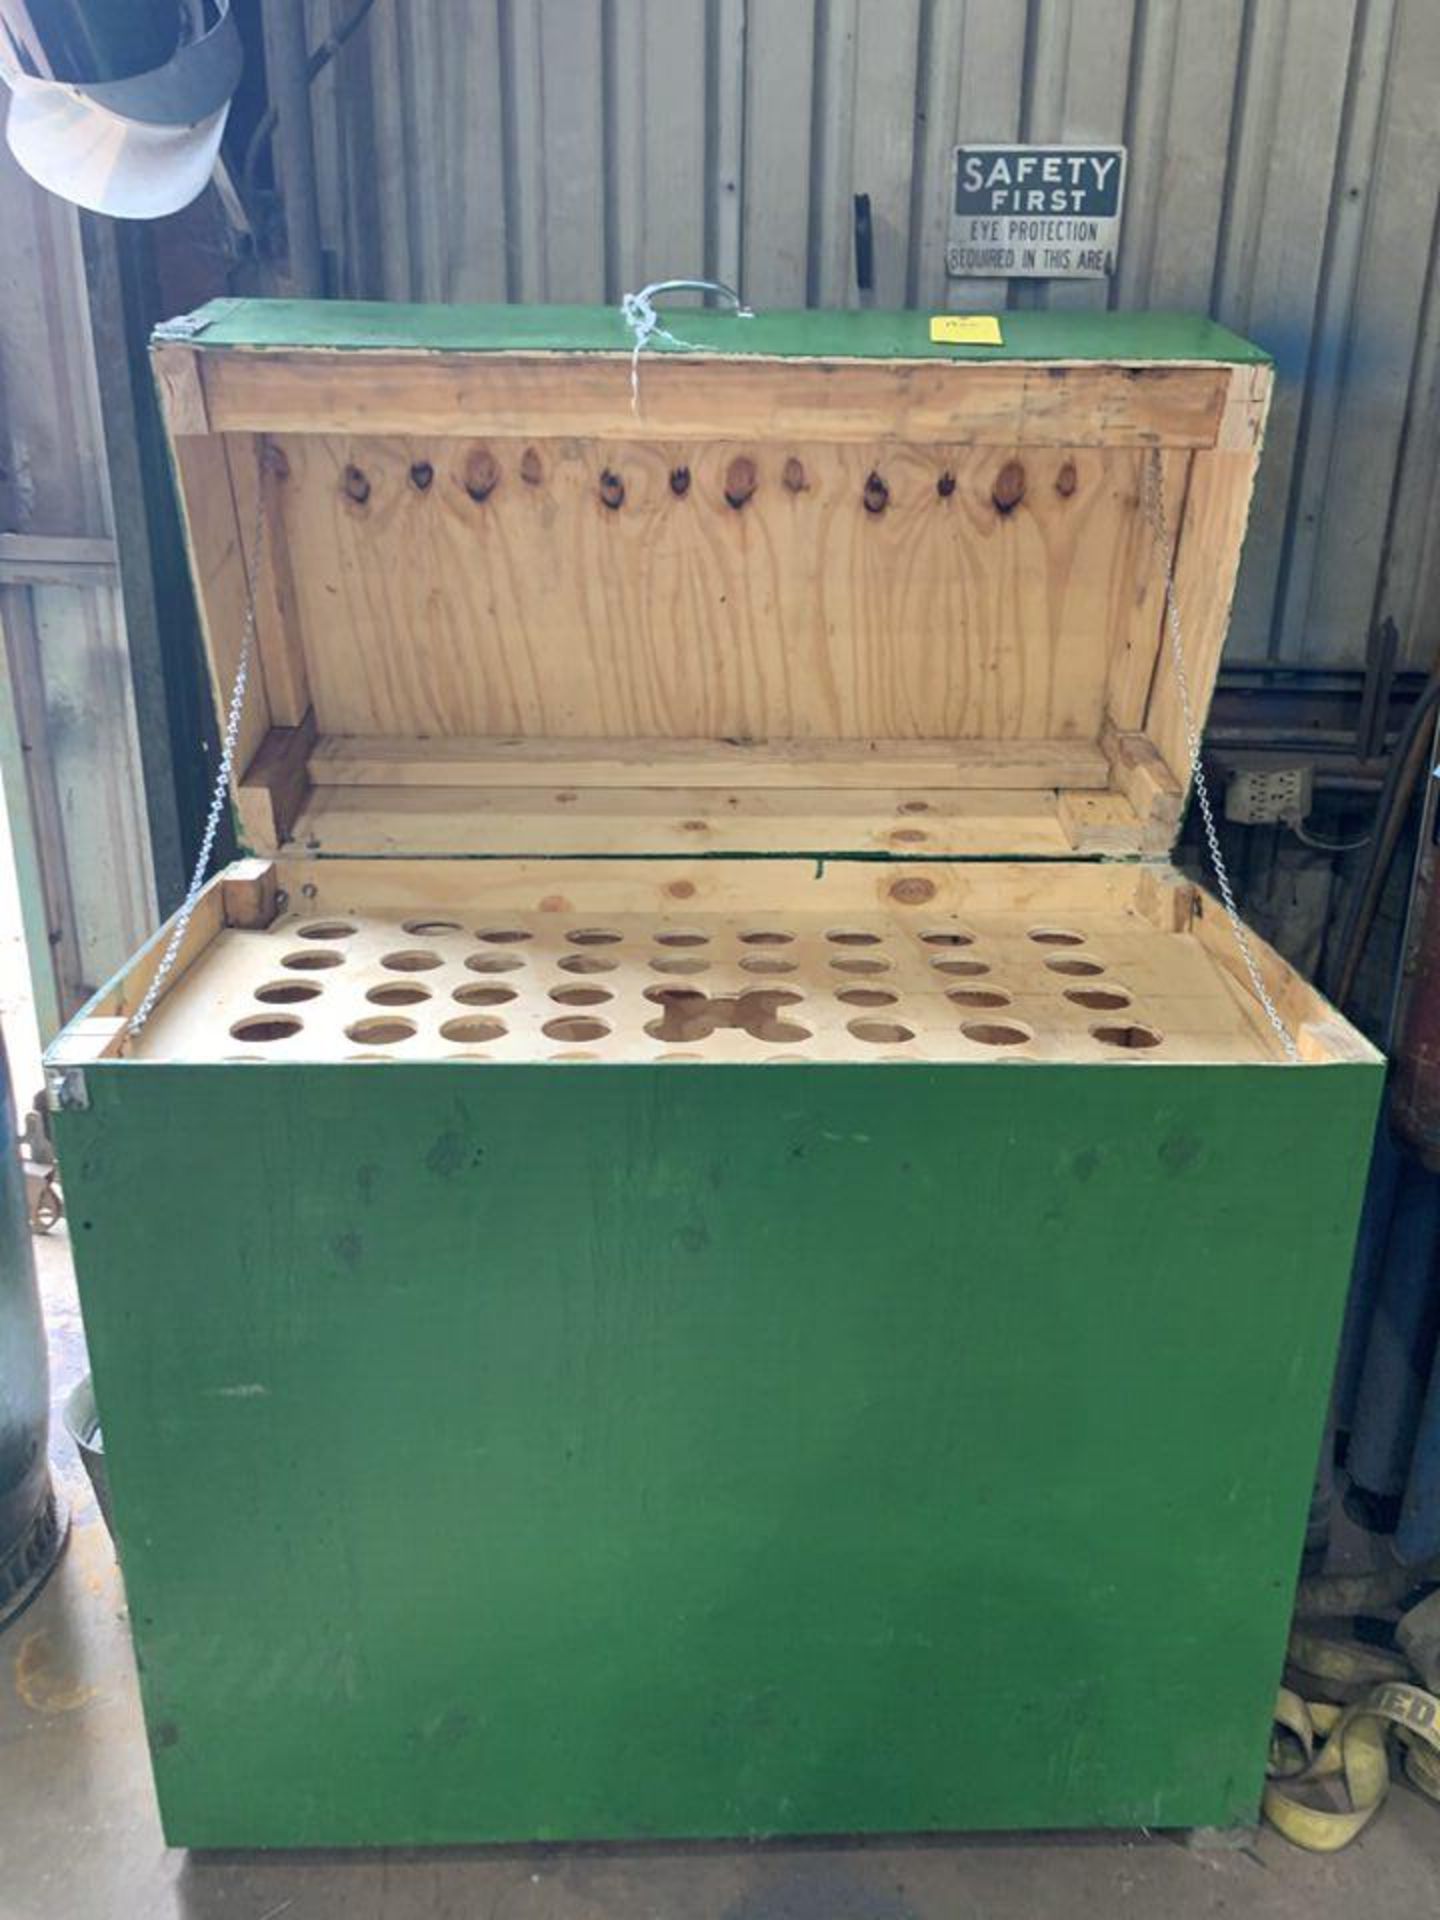 Wooden Tool Box with Holes for Holding Tools (green)